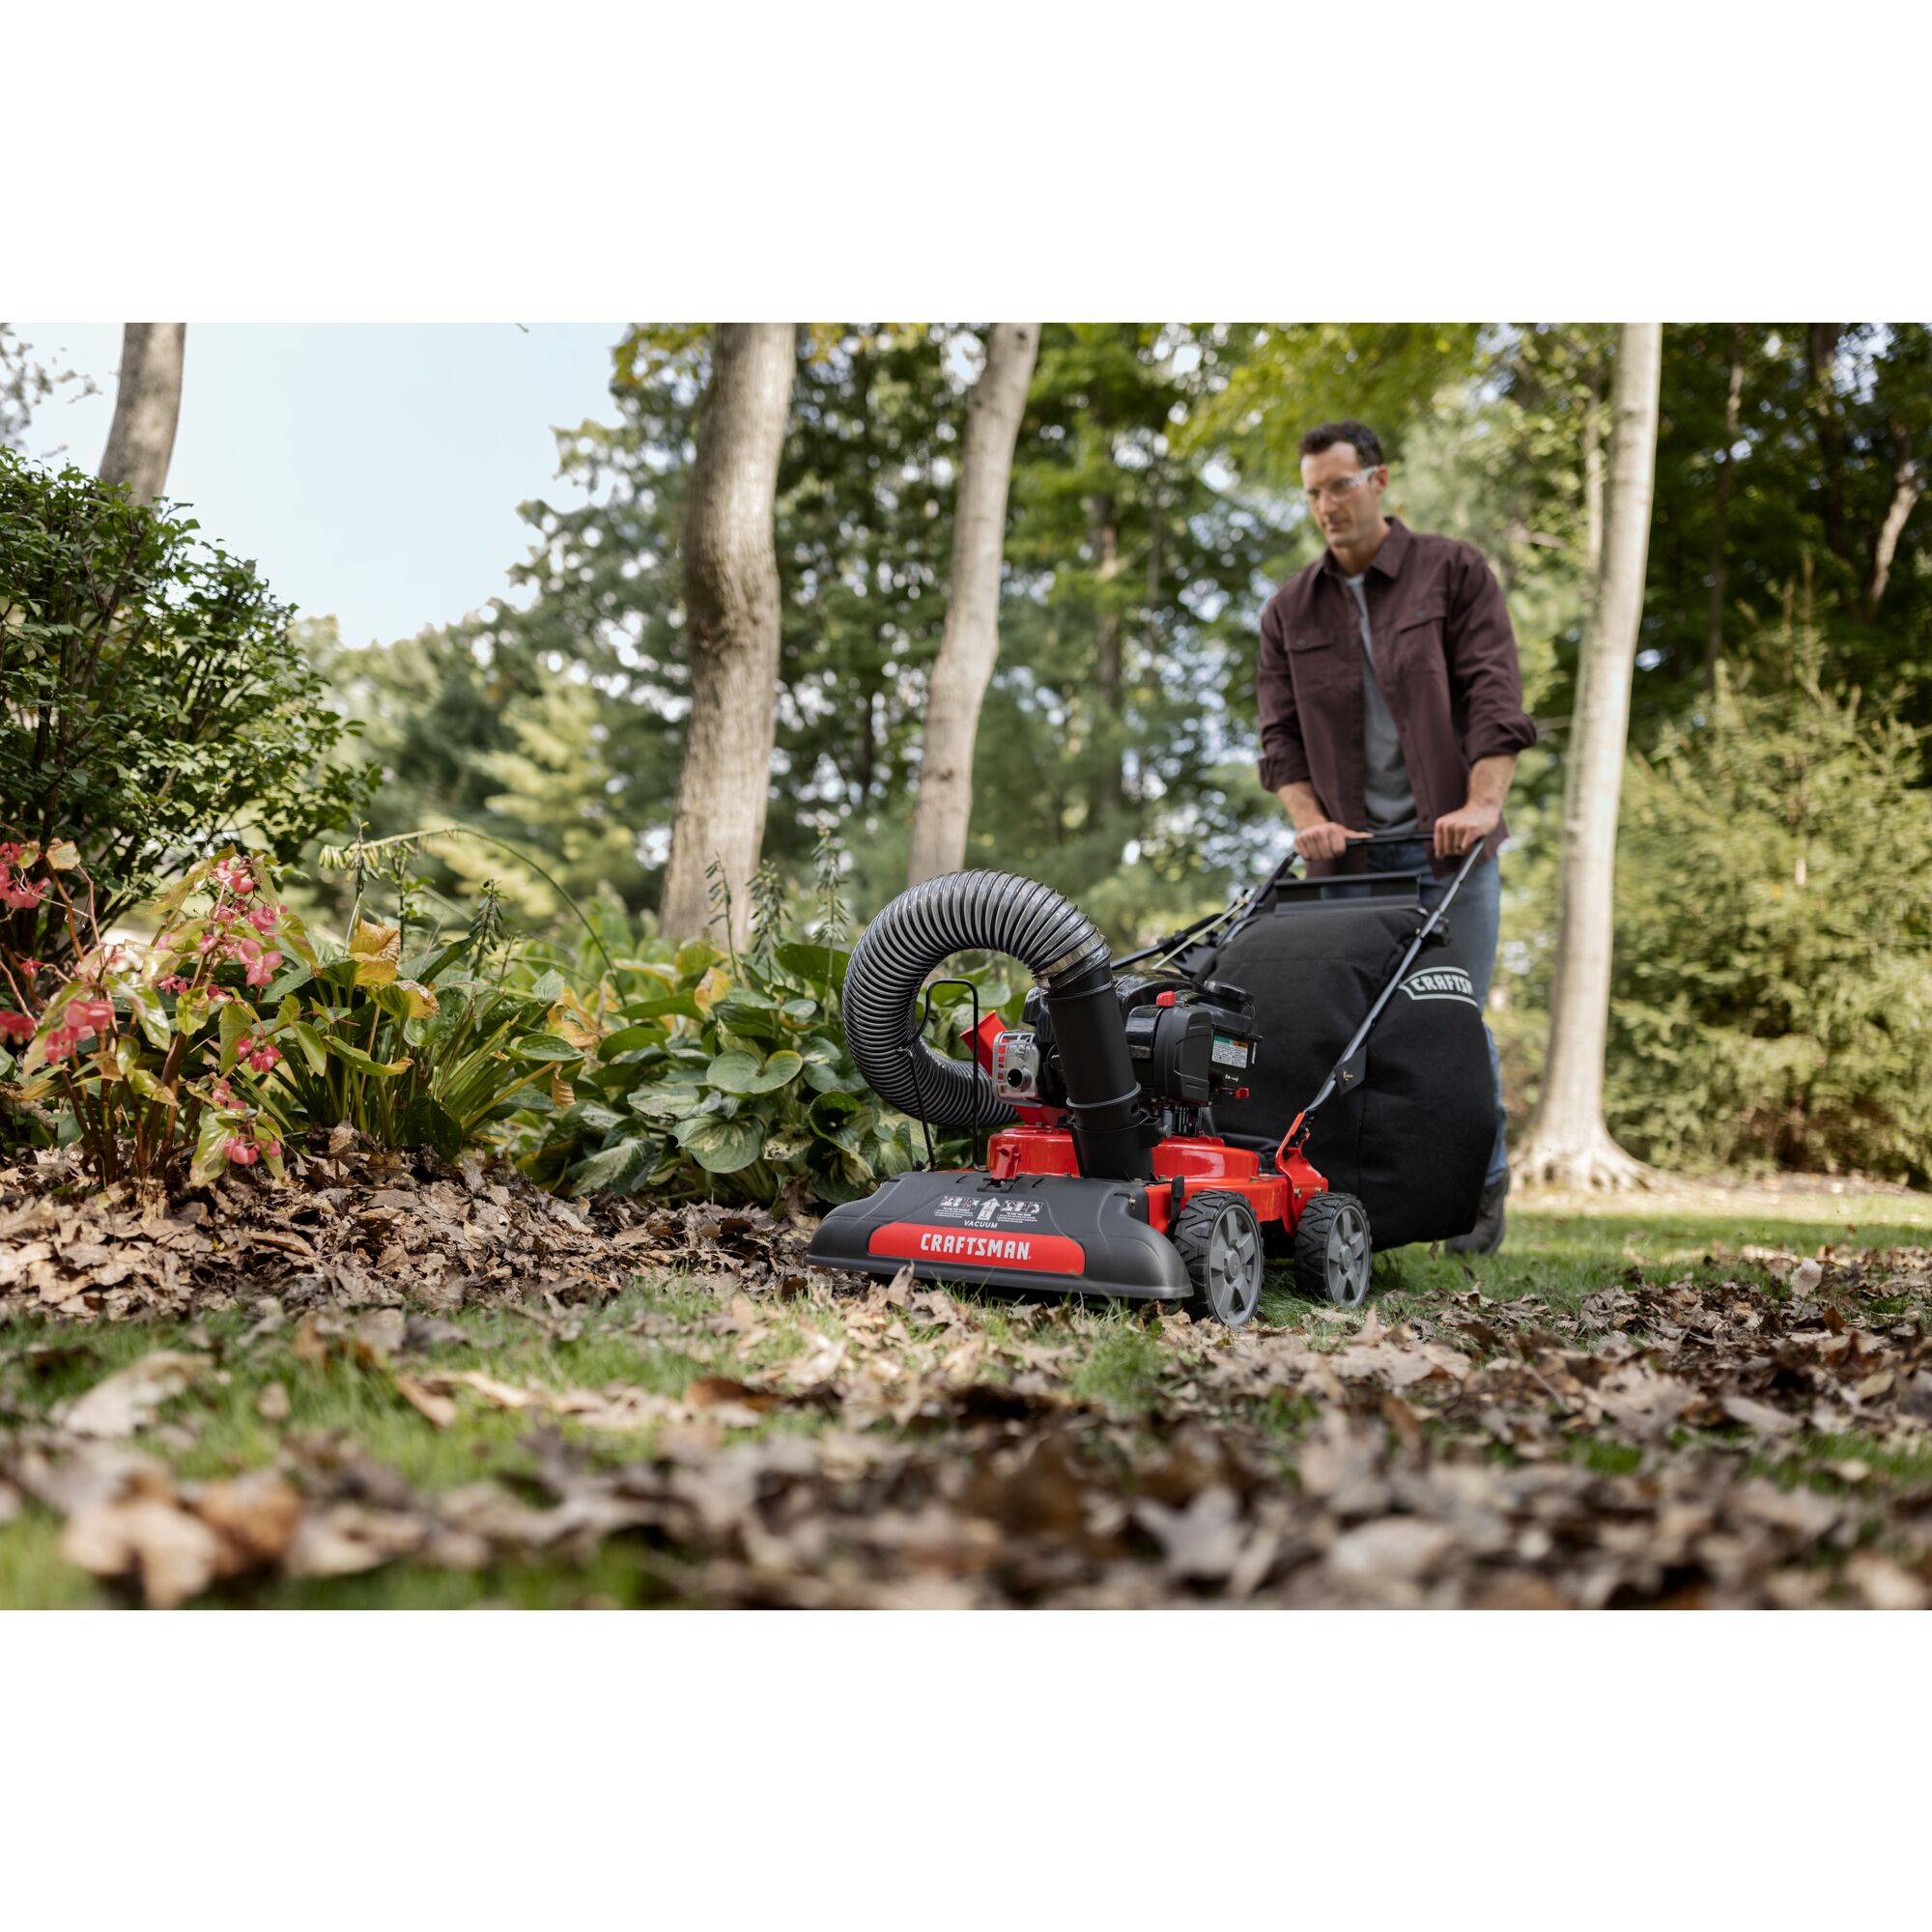 CRAFTSMAN 24-In. 163cc Chipper Shredder Vacuum attached to mower mowing up leaves in wooded area